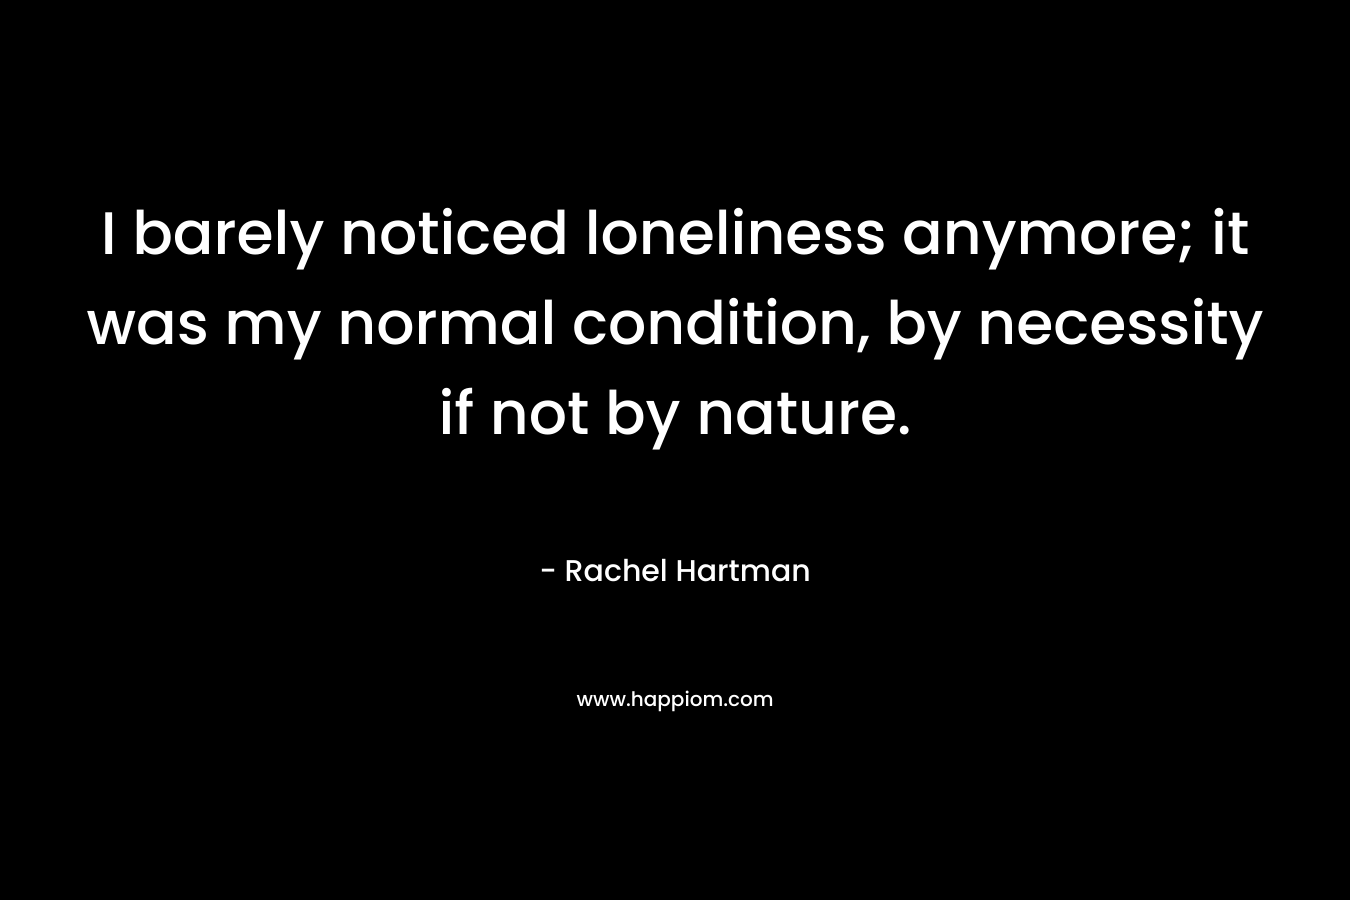 I barely noticed loneliness anymore; it was my normal condition, by necessity if not by nature. – Rachel Hartman